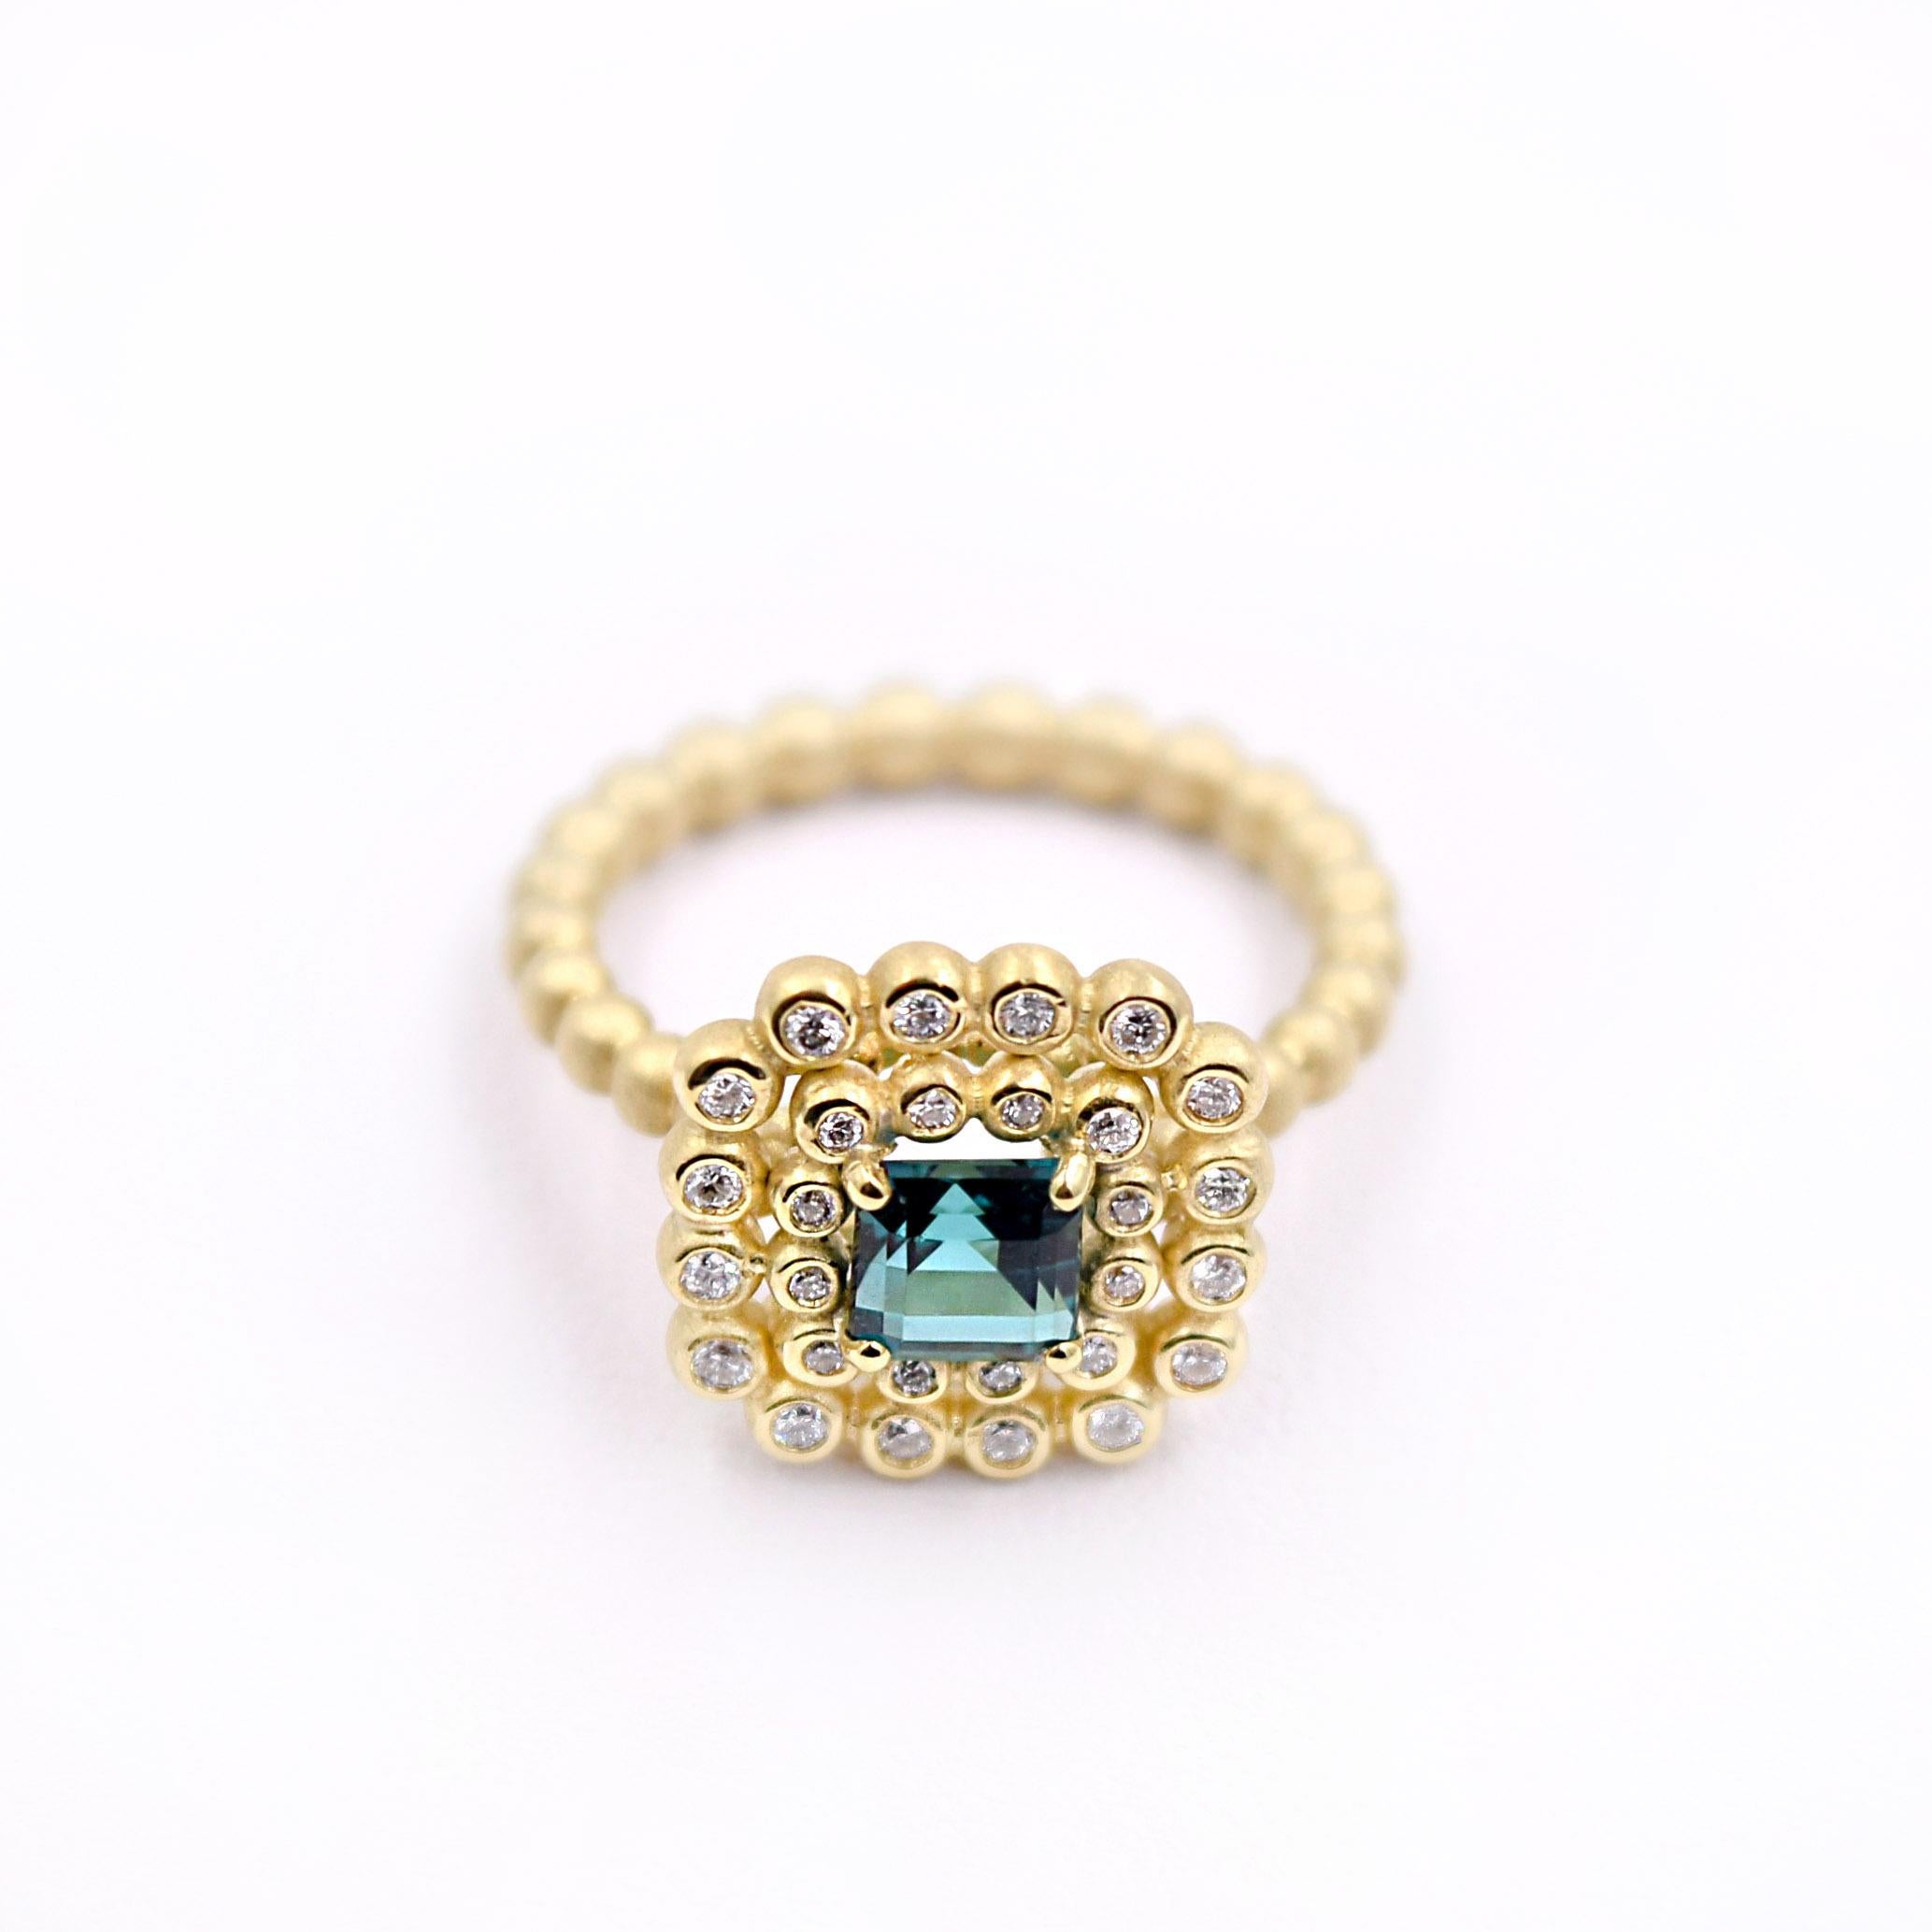 This one-of-a-kind cocktail ring is designed and handcrafted by Suzy Landa in New York.
Its square 0.7ct indicolite tourmaline is set in a basket setting and surrounded by a double row of 0.28ct diamond-set beads. 
Size of the ring is 5 and can be